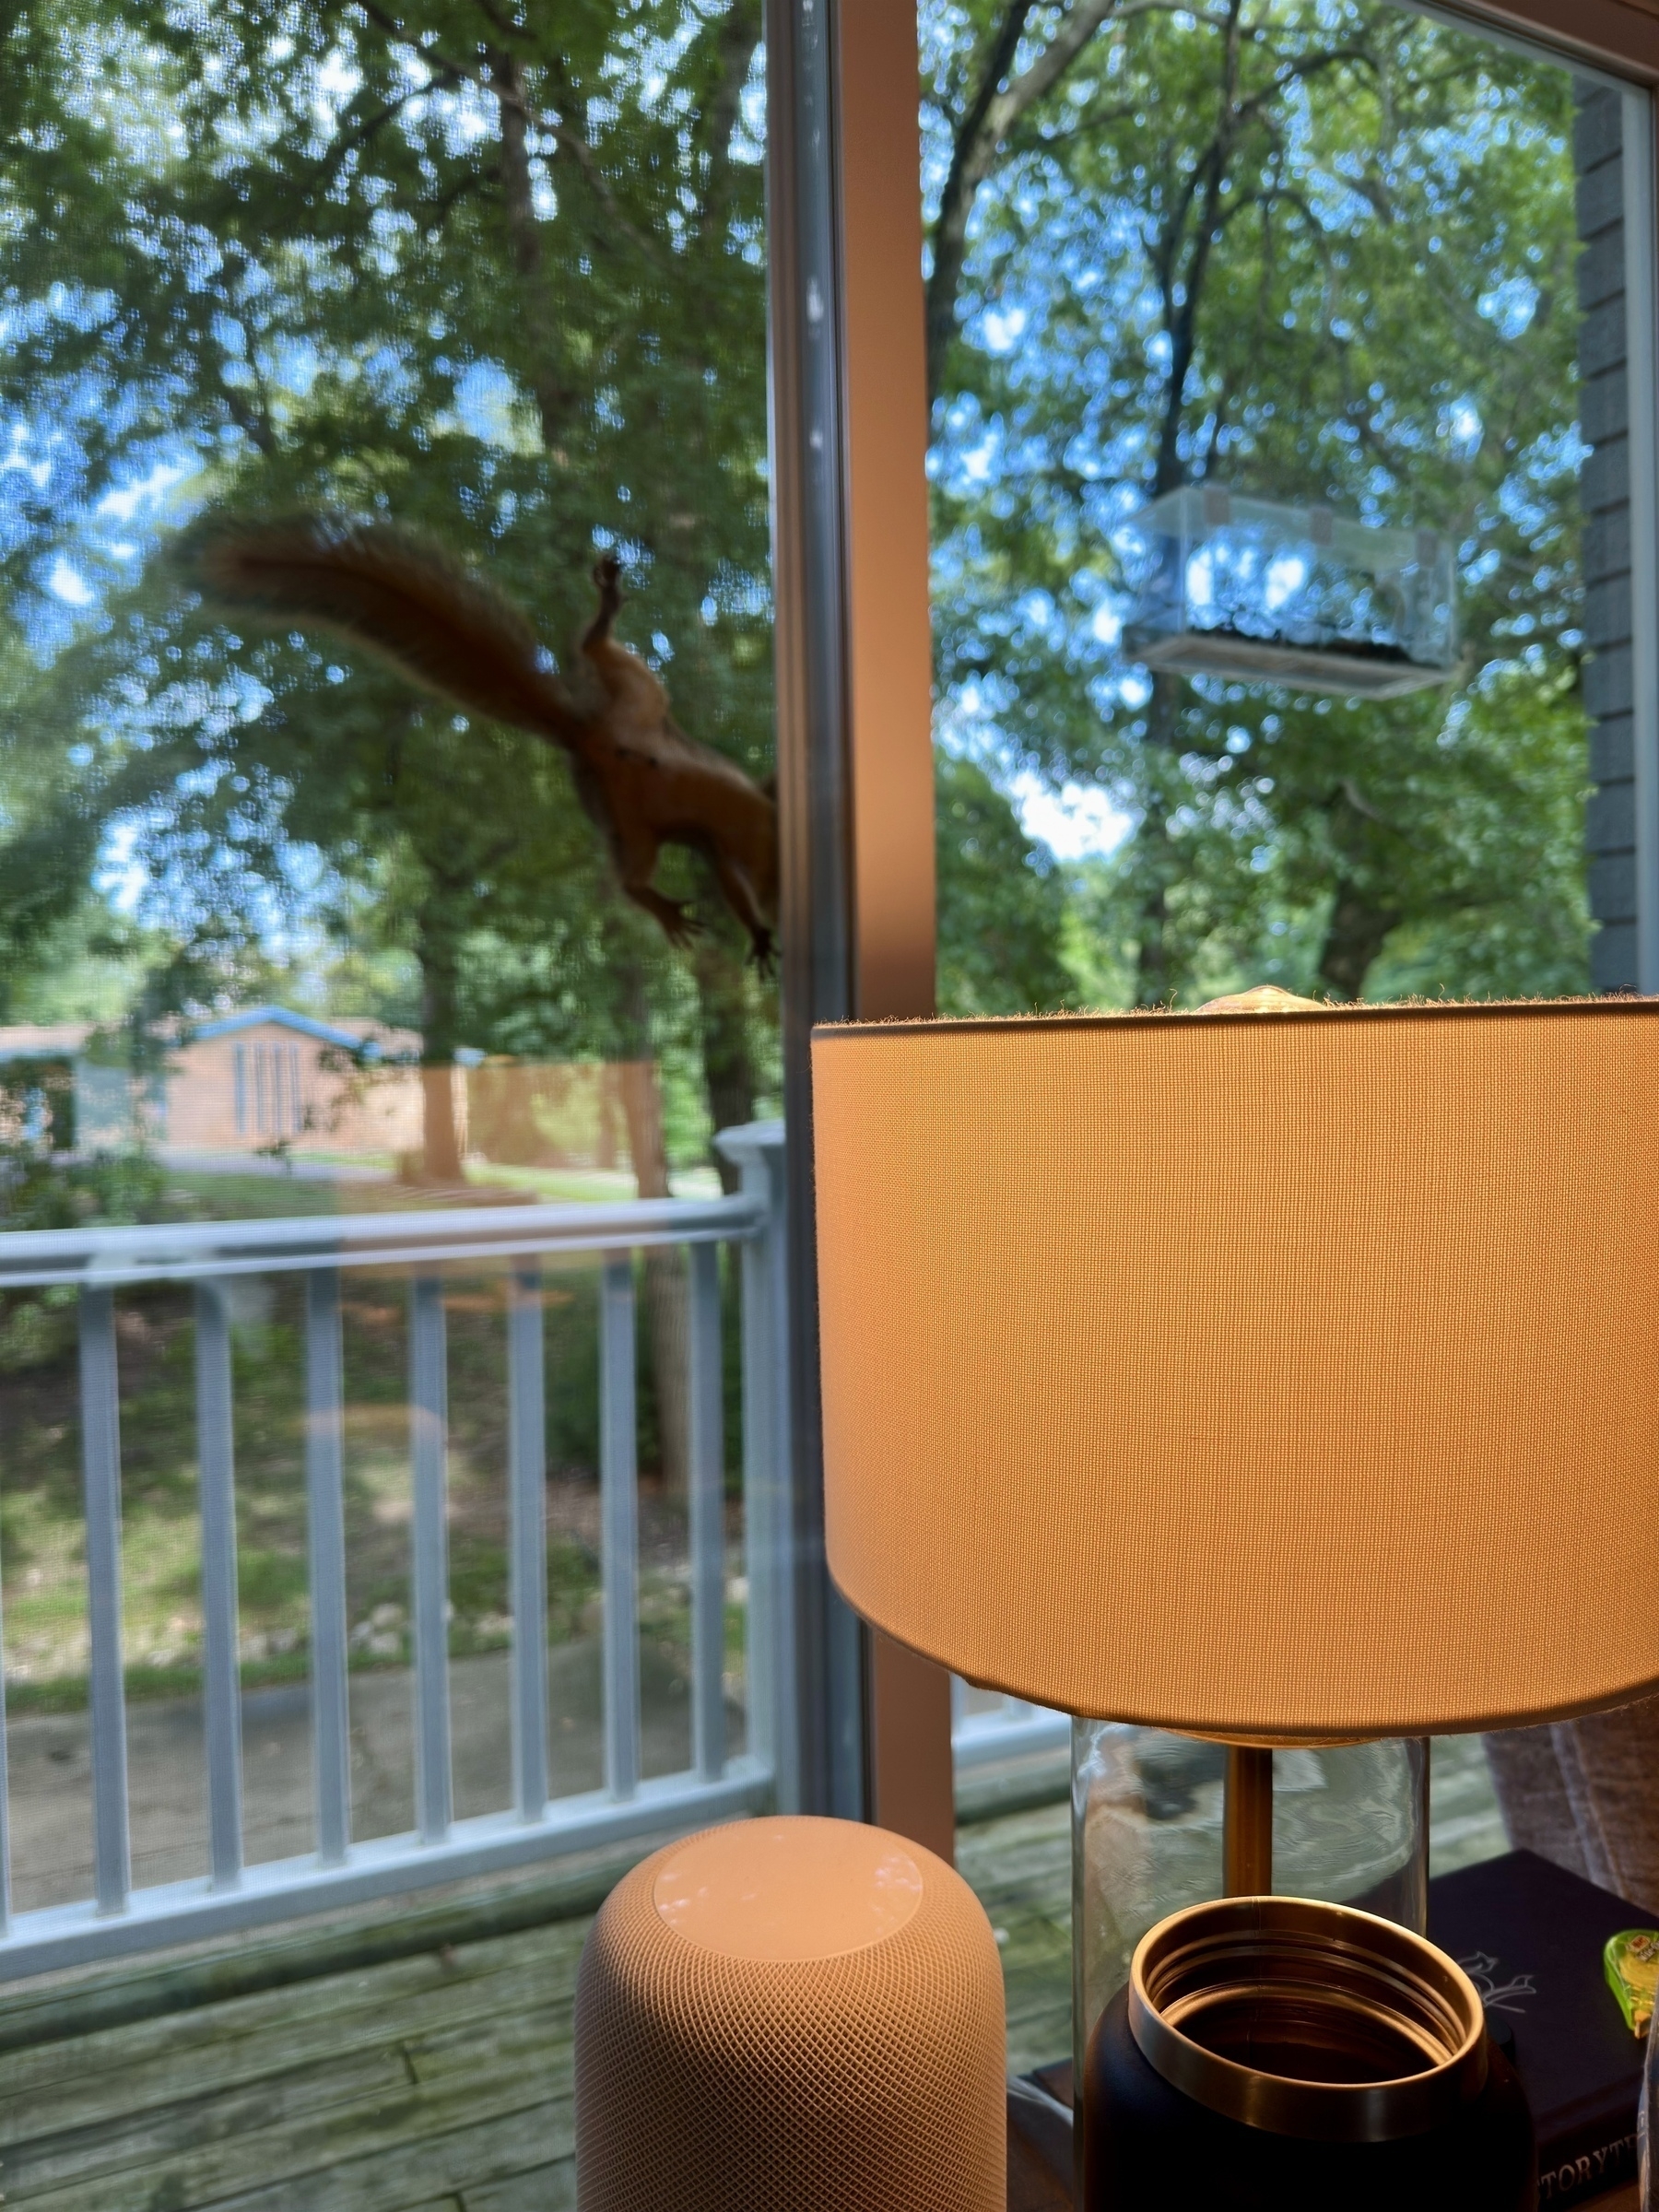 A squirrel is climbing on a glass door near a lit table lamp and a smart speaker, with a scenic outdoor view in the background.